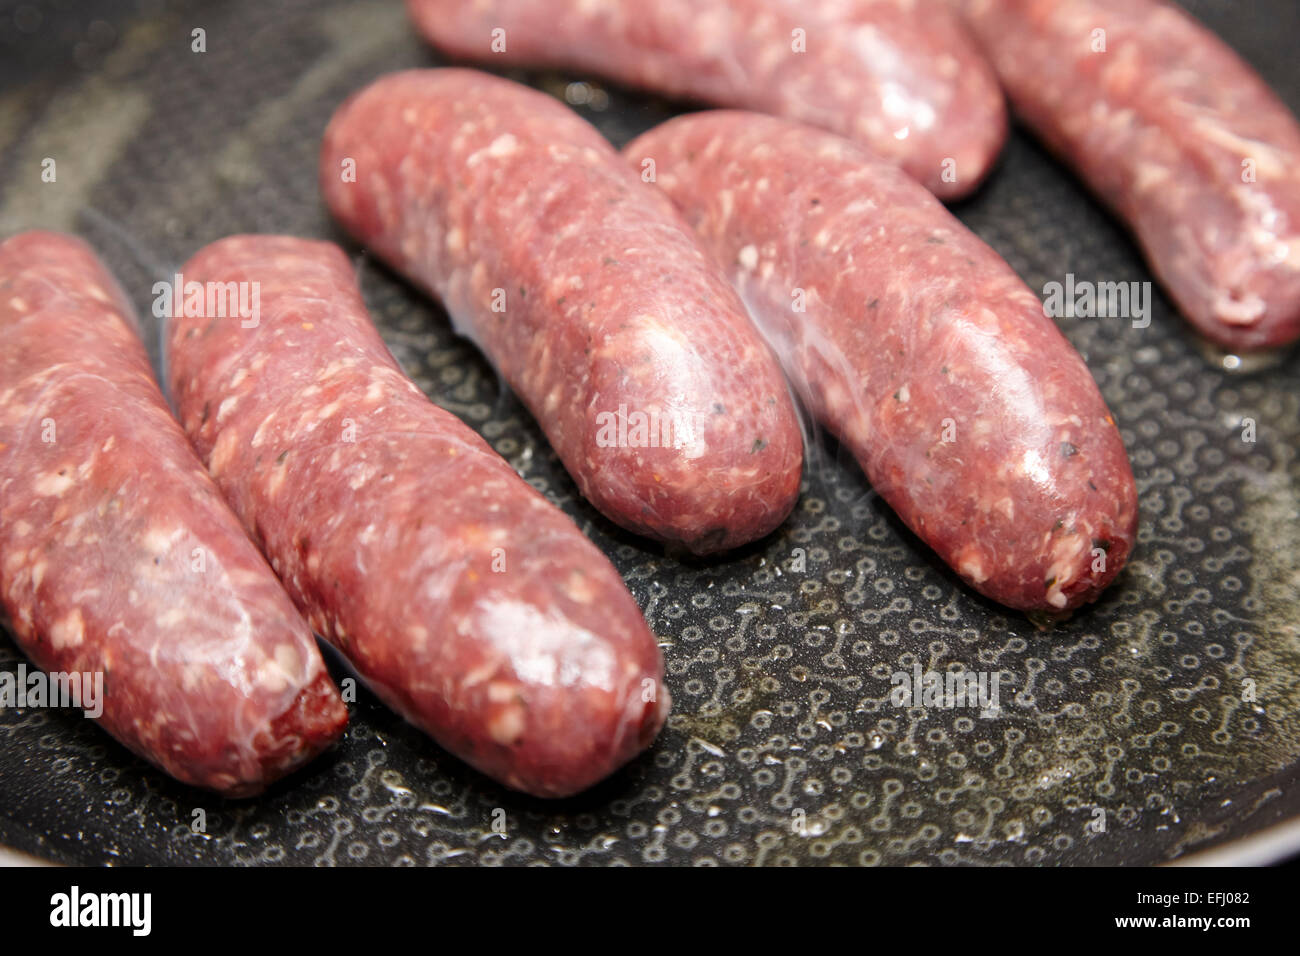 frying low fat venison sausages in a pan with little fat content Stock Photo